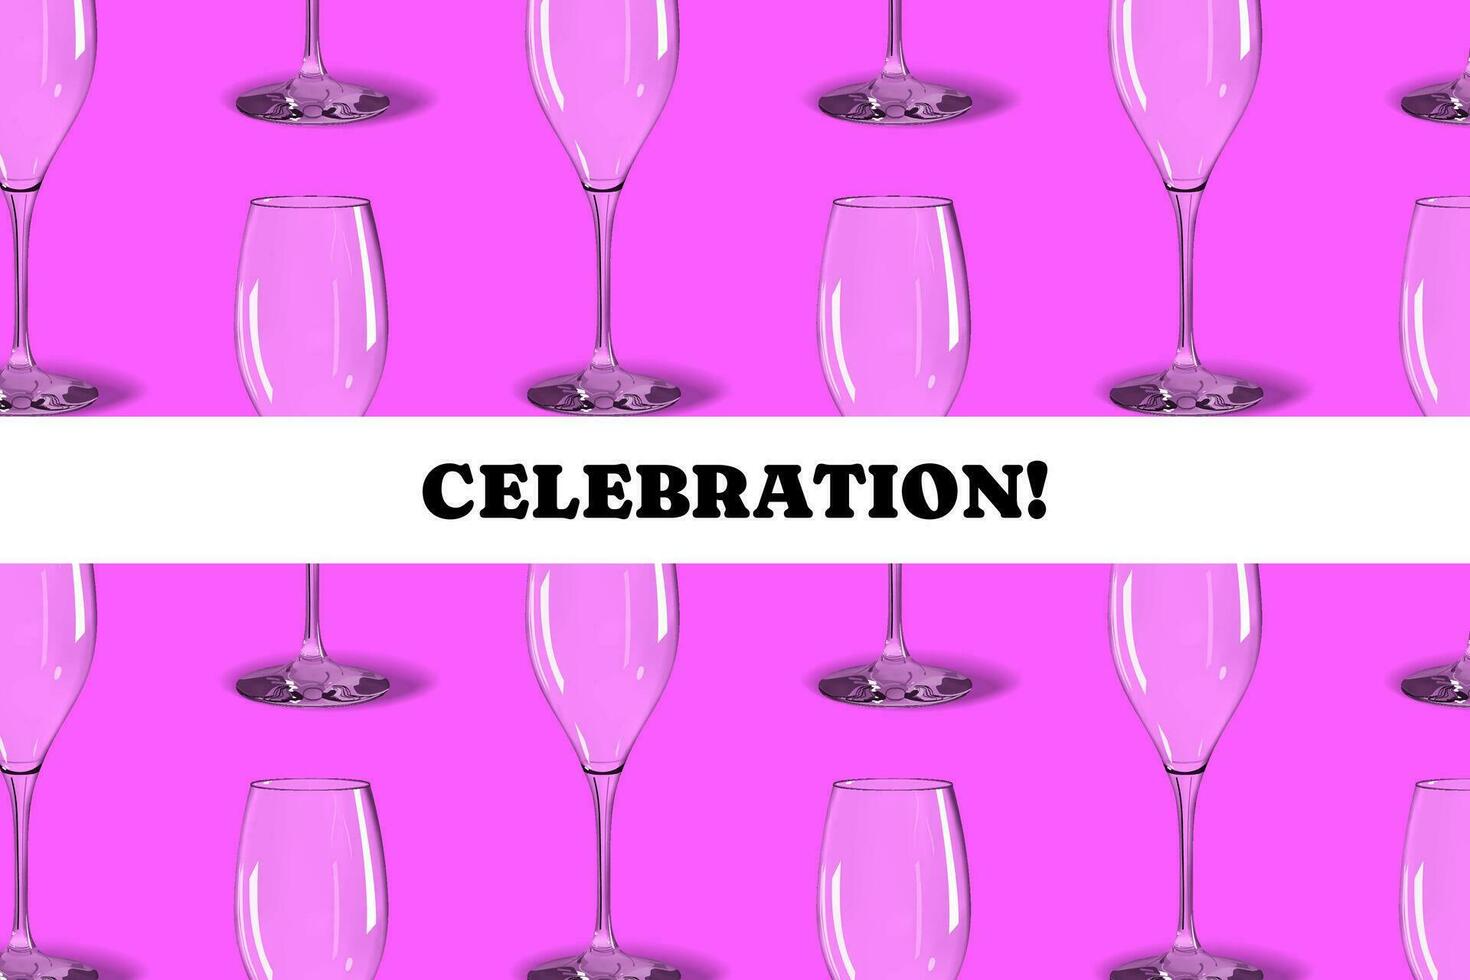 Celebration party holiday design with realistic champagne glasses vector